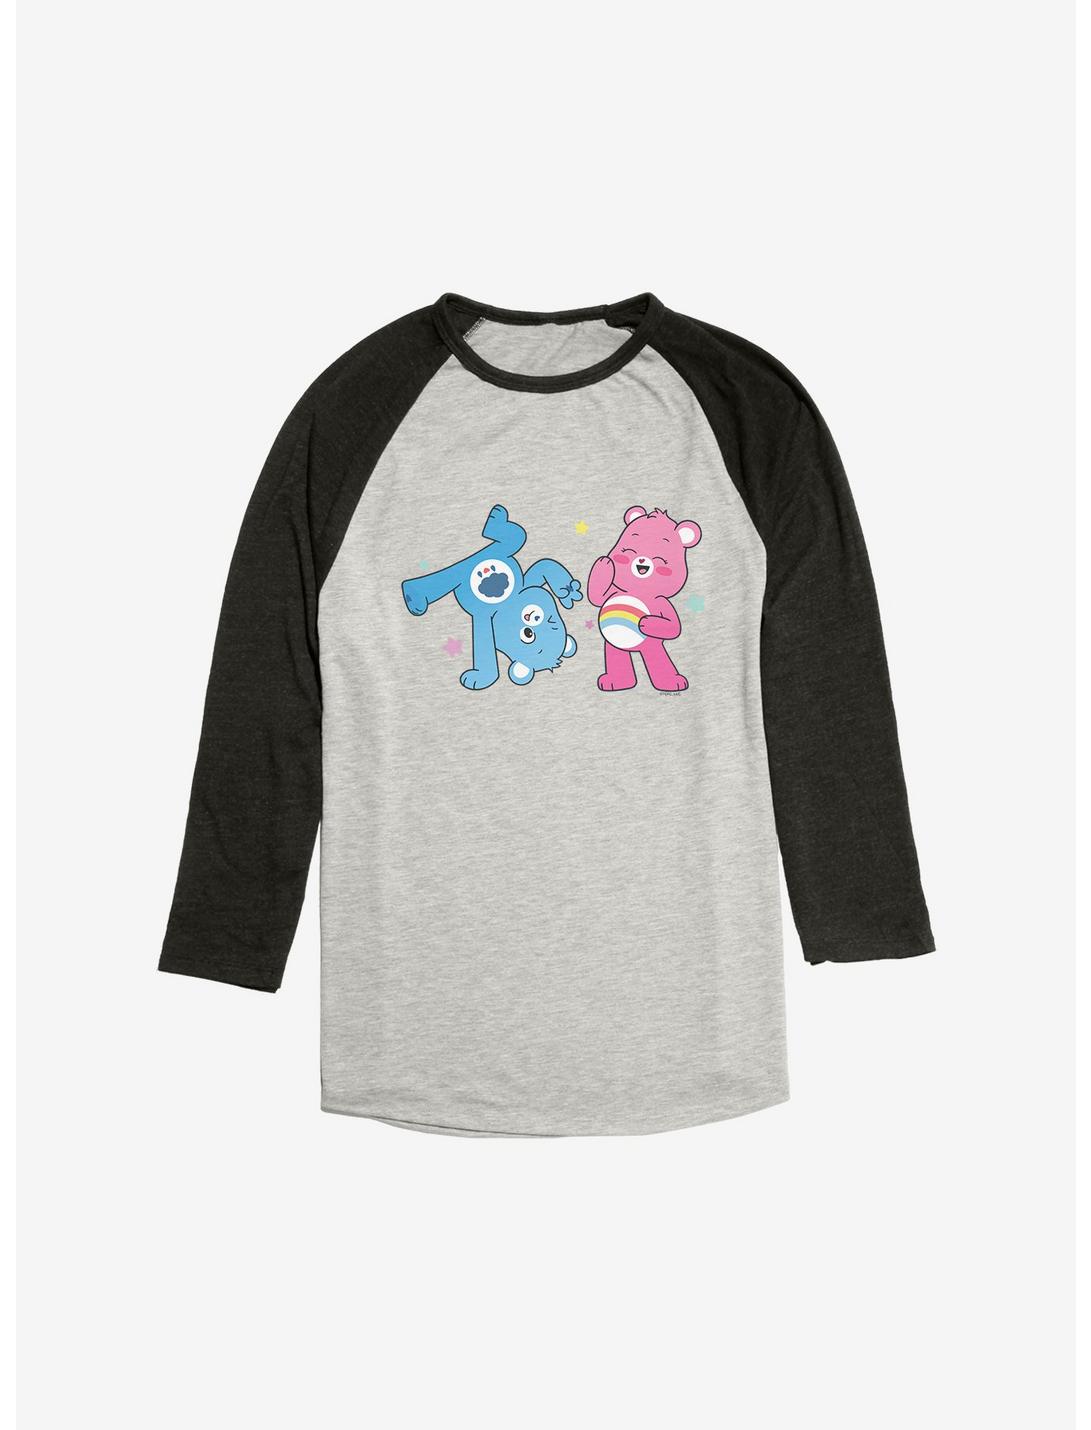 Care Bears Cheer and Grumpy Goofing Around Raglan, Oatmeal With Black, hi-res